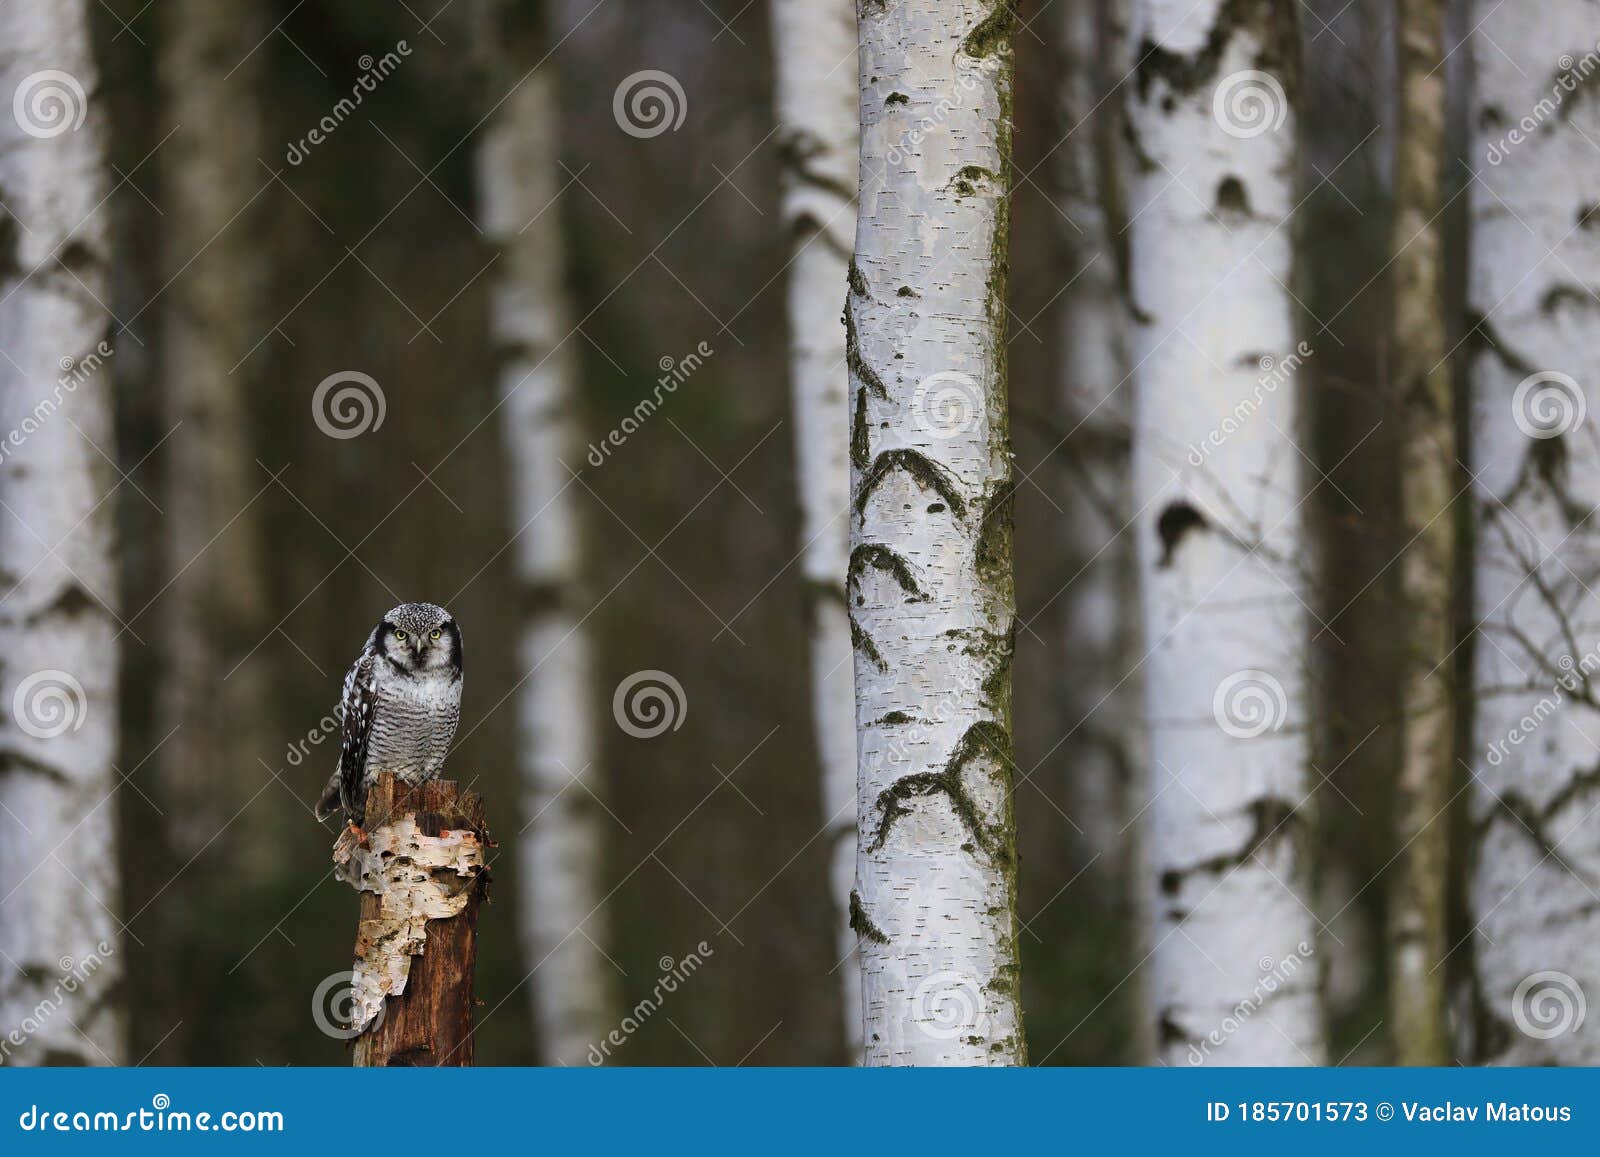 northern hawk-owl surnia ulula perched on rotten trunk in birch forest. owl with yellow eyes. one of a few diurnal owls.